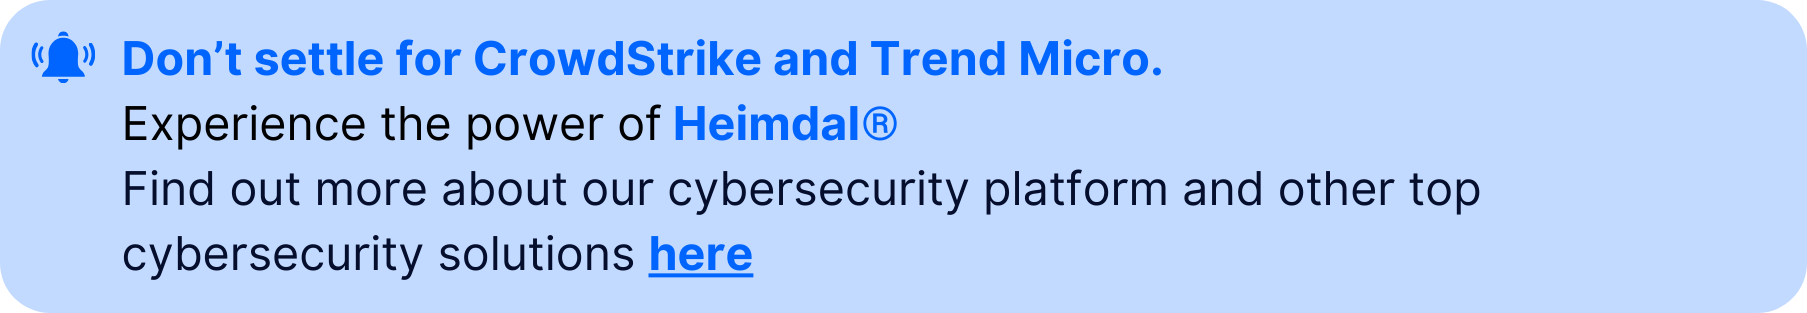 Notification banner with text: "Don't settle for CrowdStrike and Trend Micro. Experience the power of Heimdal®. Find out more about our cybersecurity platform and other top cybersecurity solutions here."